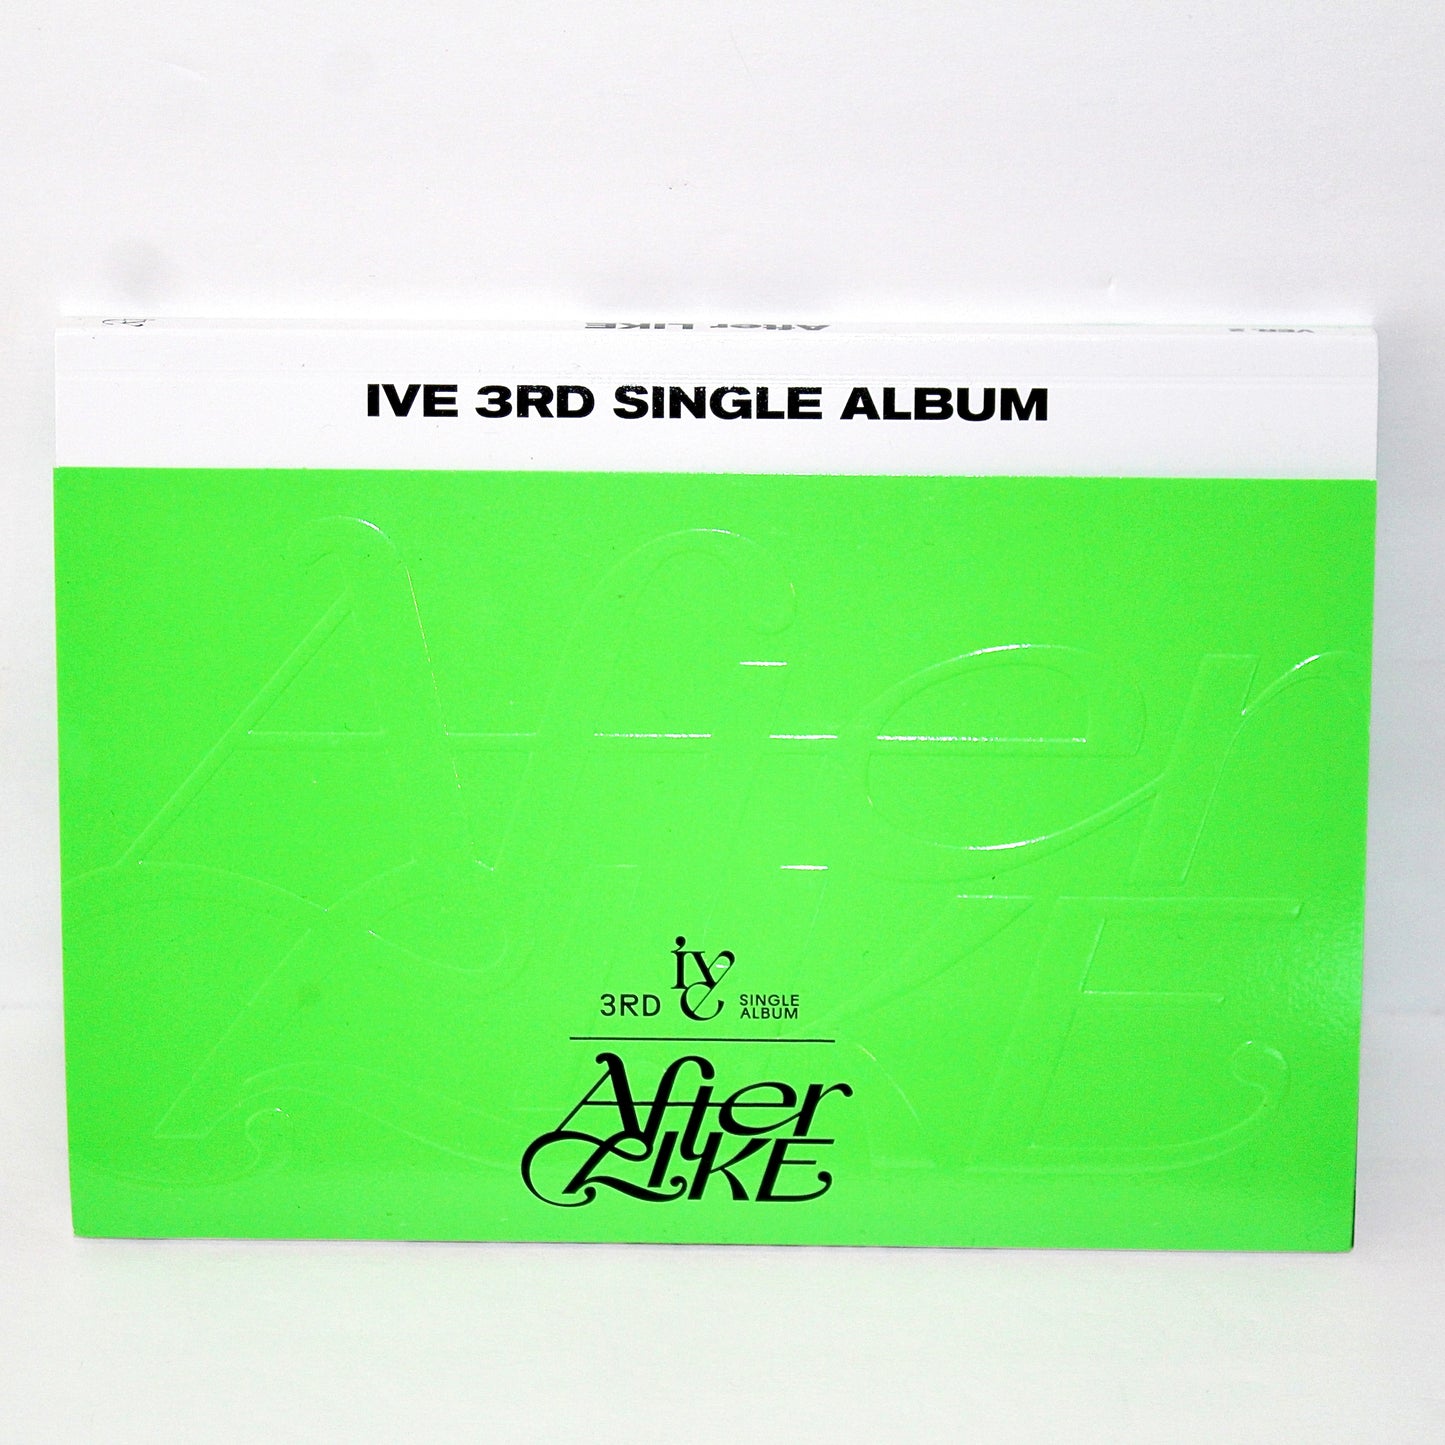 IVE 3rd Single Album: After Like | Ver. 2